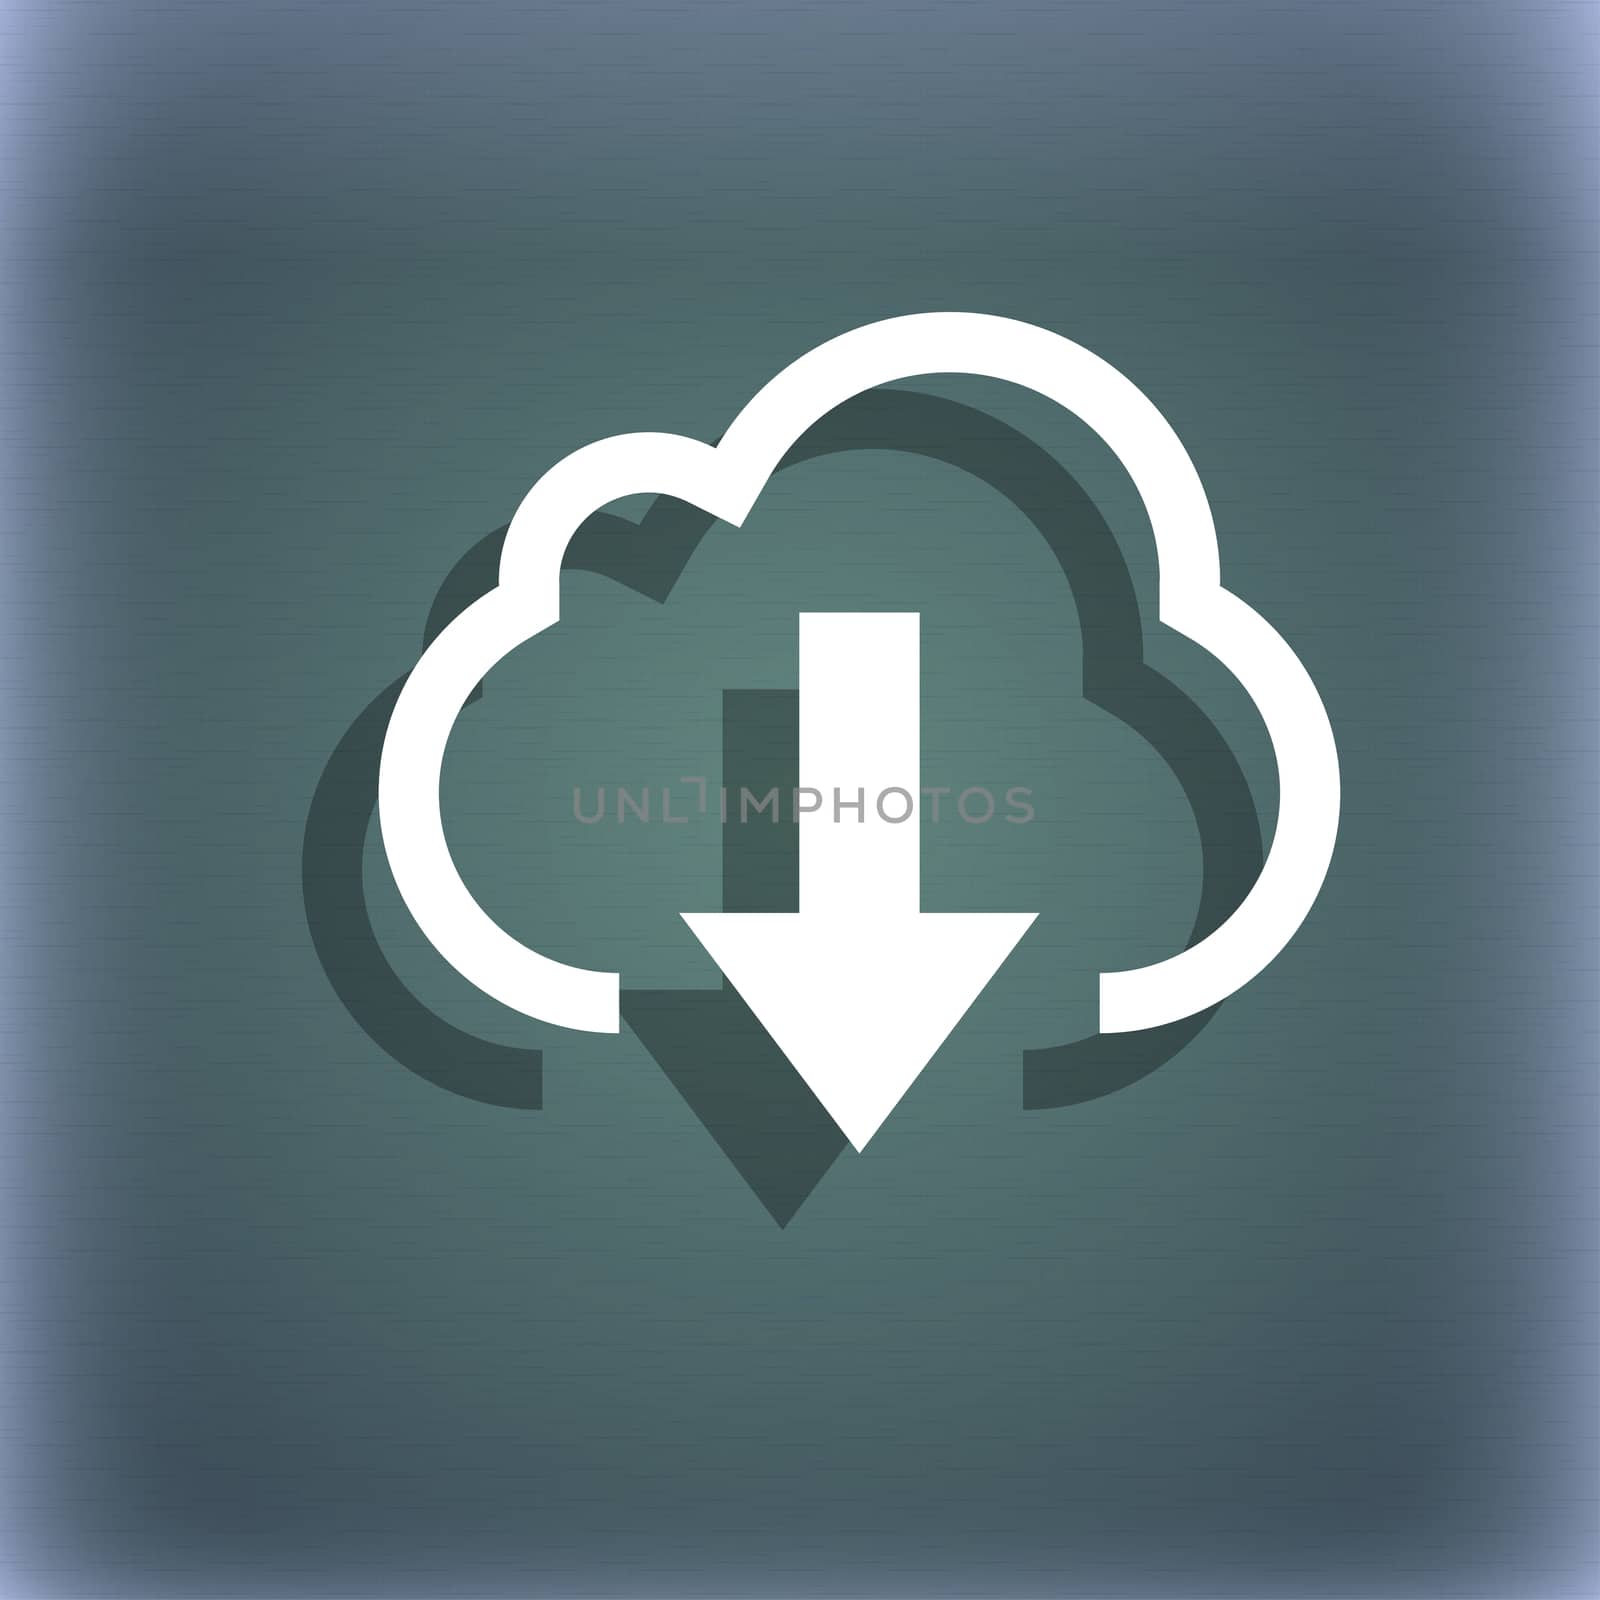 Download from cloud icon symbol on the blue-green abstract background with shadow and space for your text. illustration